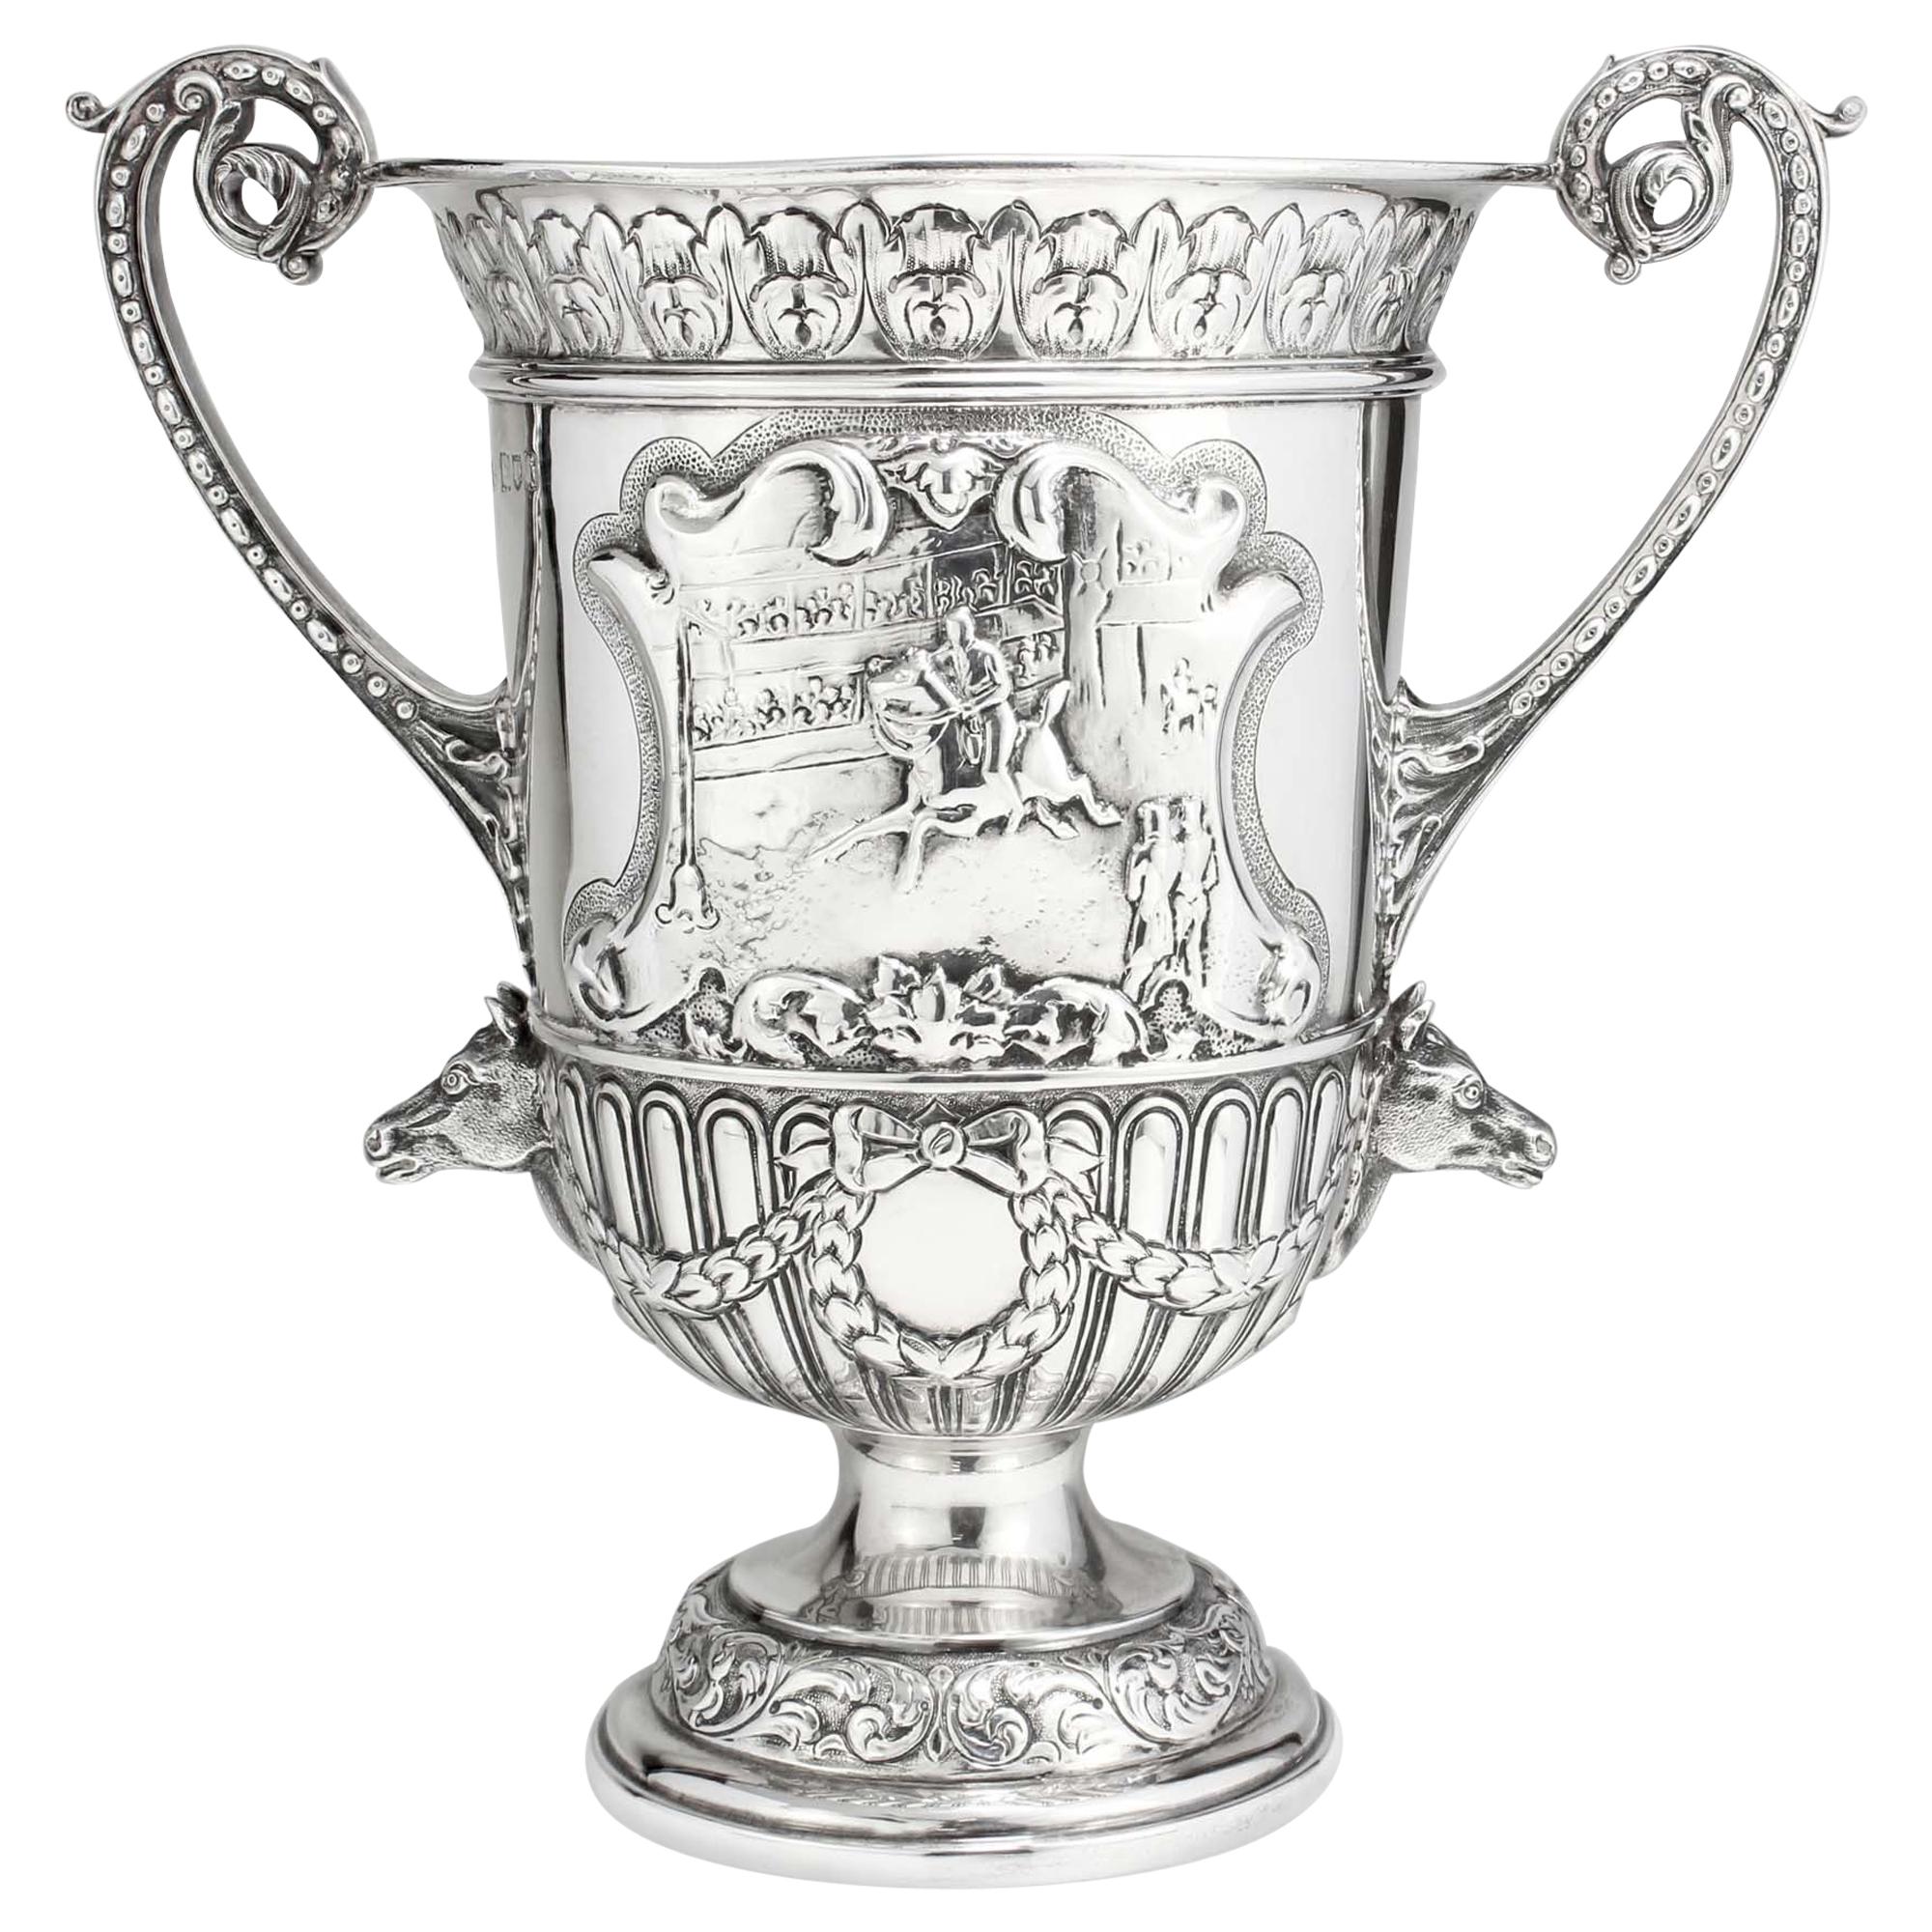 Antique Edwardian Silver Trophy with Two Handles, London, 1904